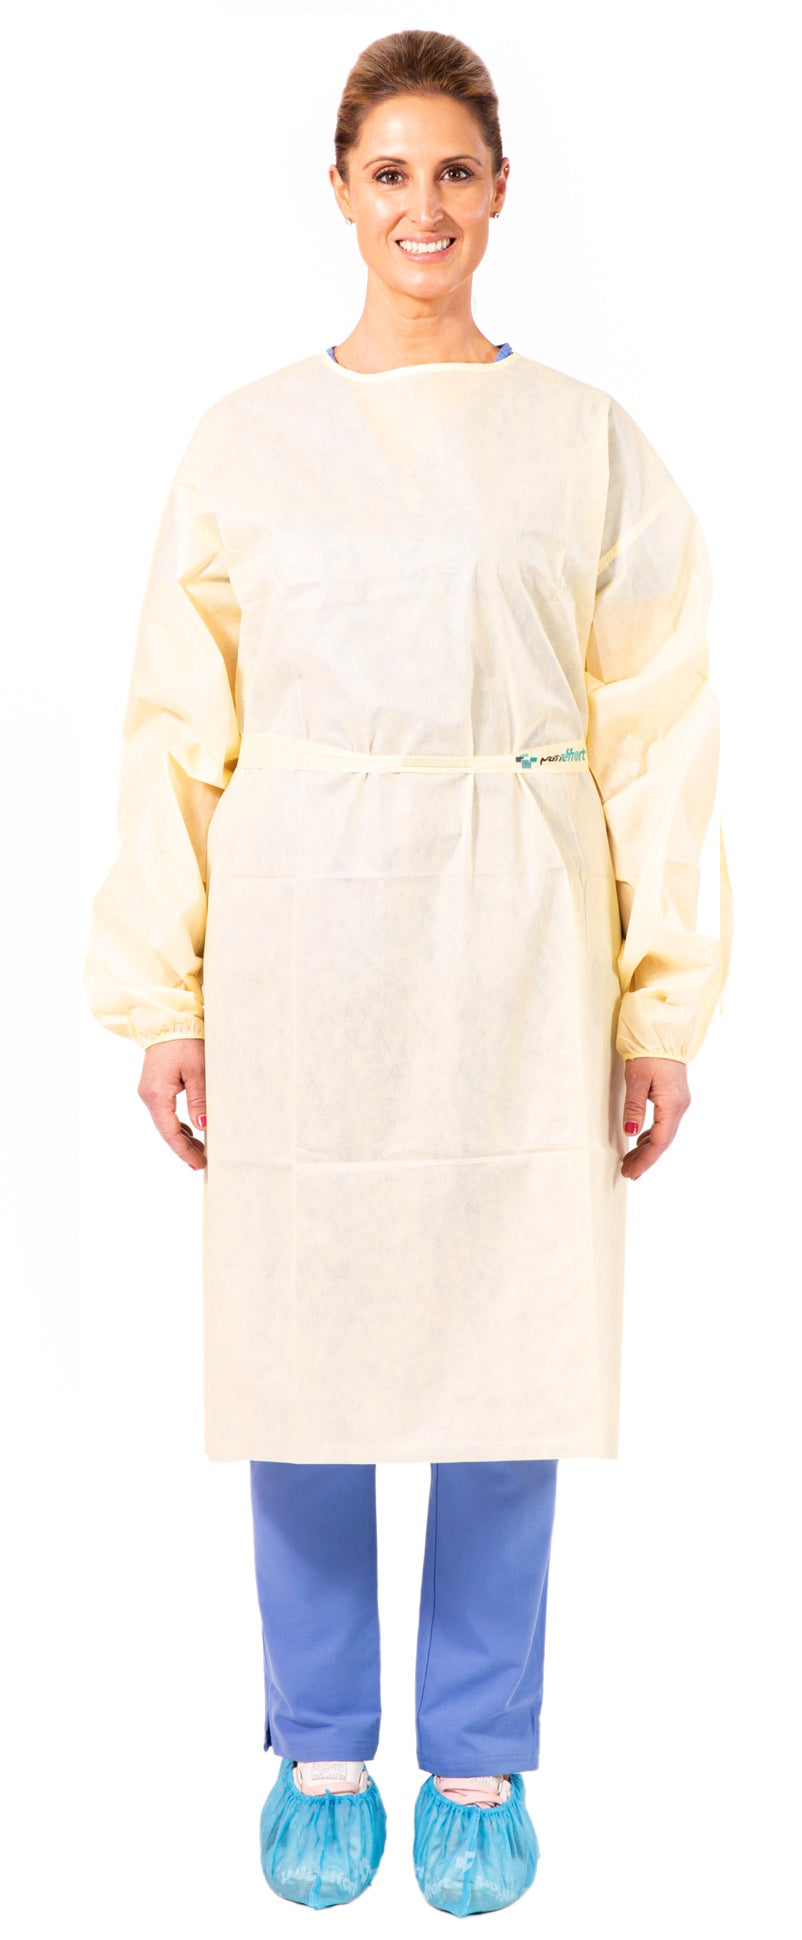 AAMI Level 2 SMS Isolation Gown